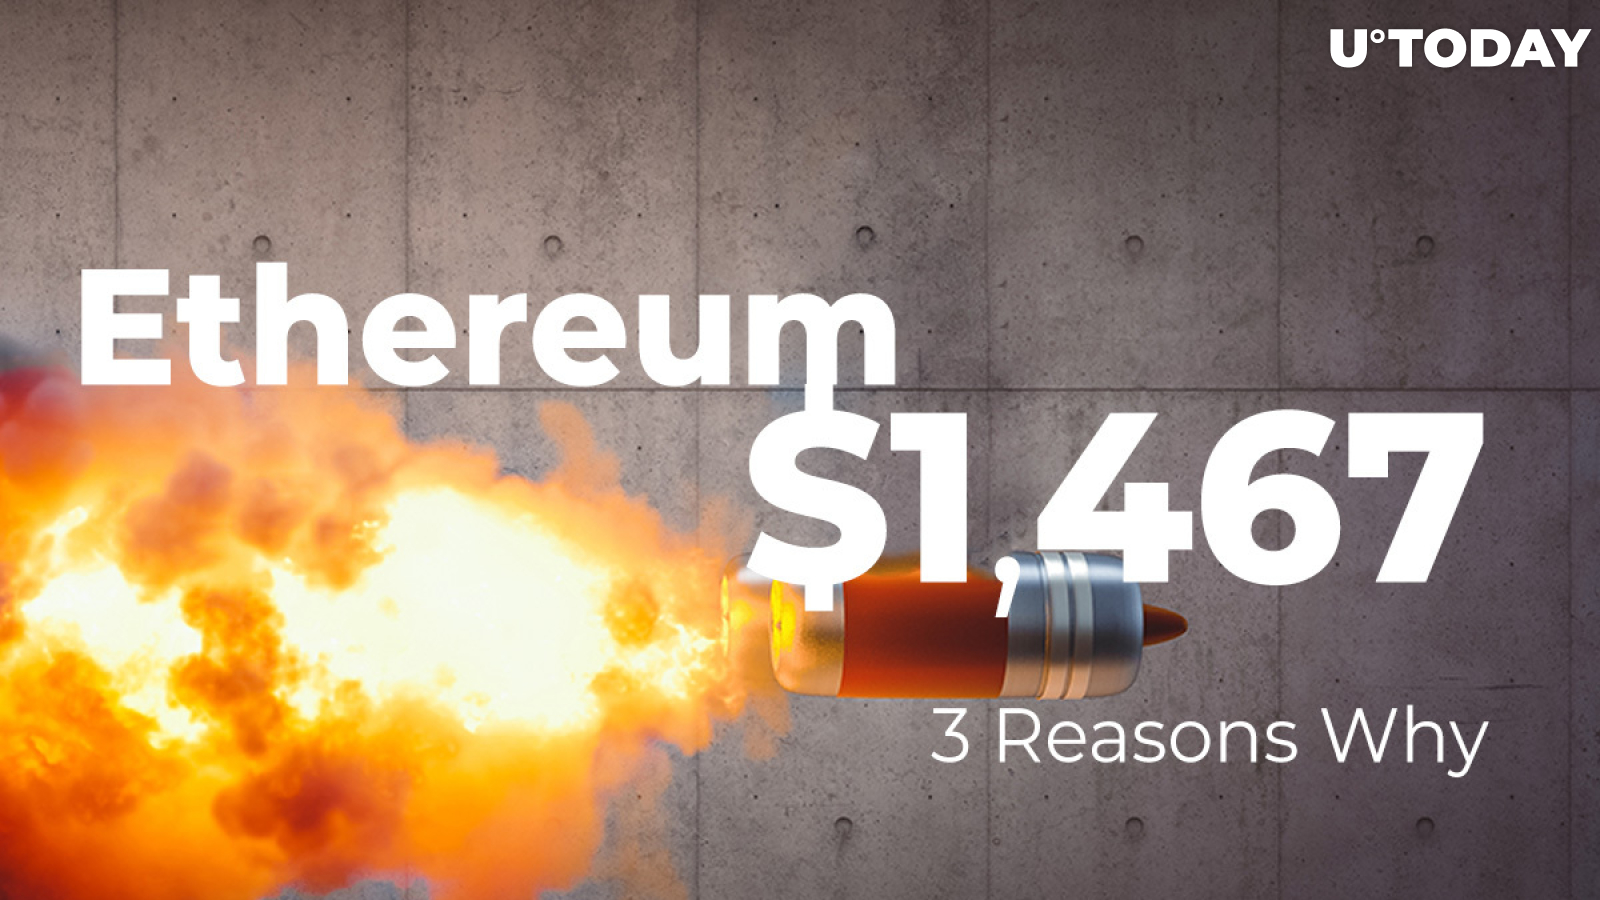 Three Reasons Why Ethereum Soared to New All-Time High of $1,467